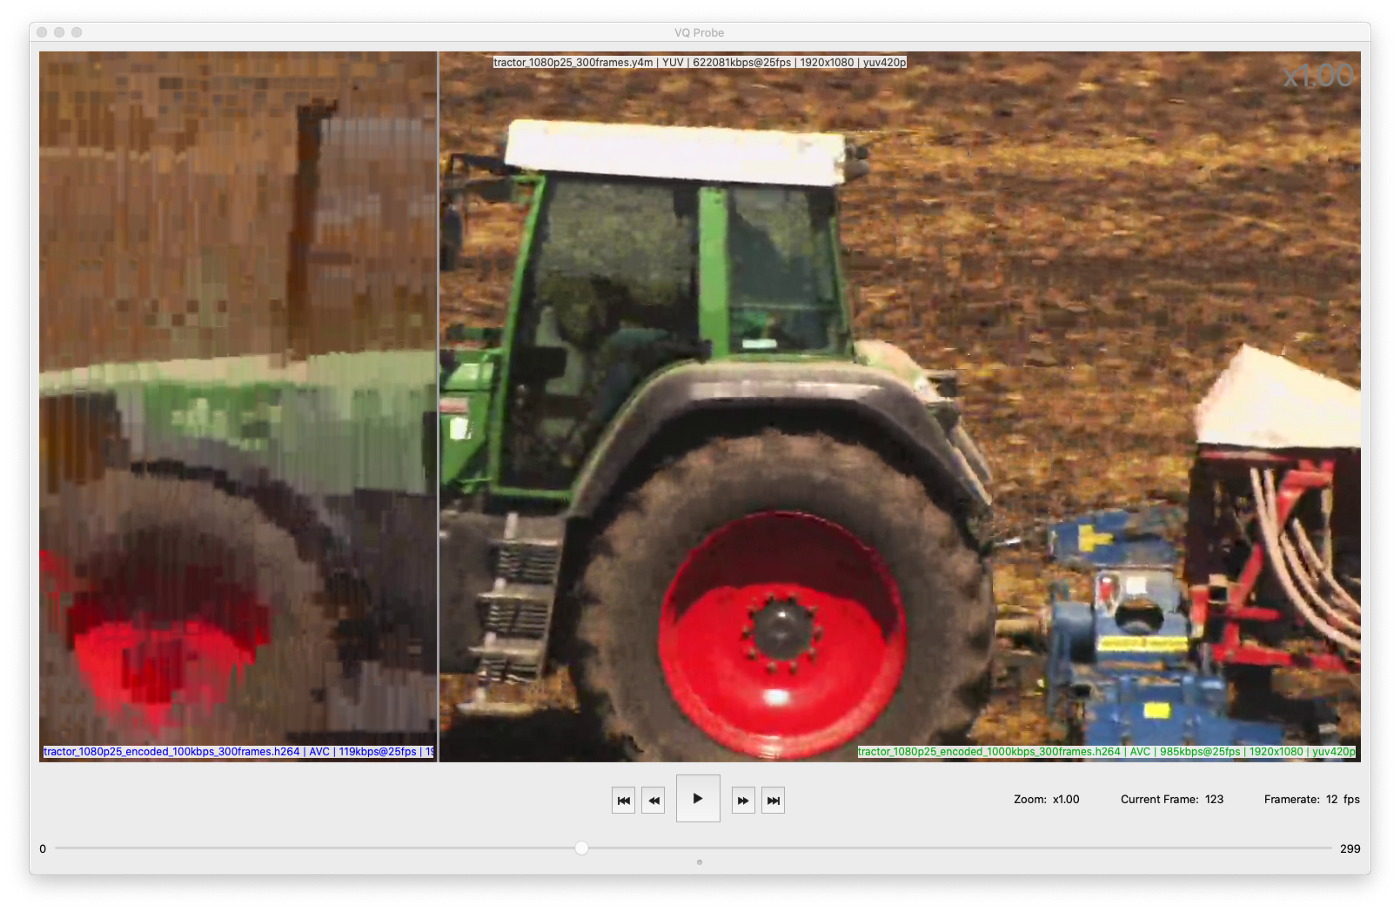 tractor_1080p25_encoded_100kbps_300frames.h264 vs. tractor_1080p25_encoded_1000kbps_300frames.h264, frame #123